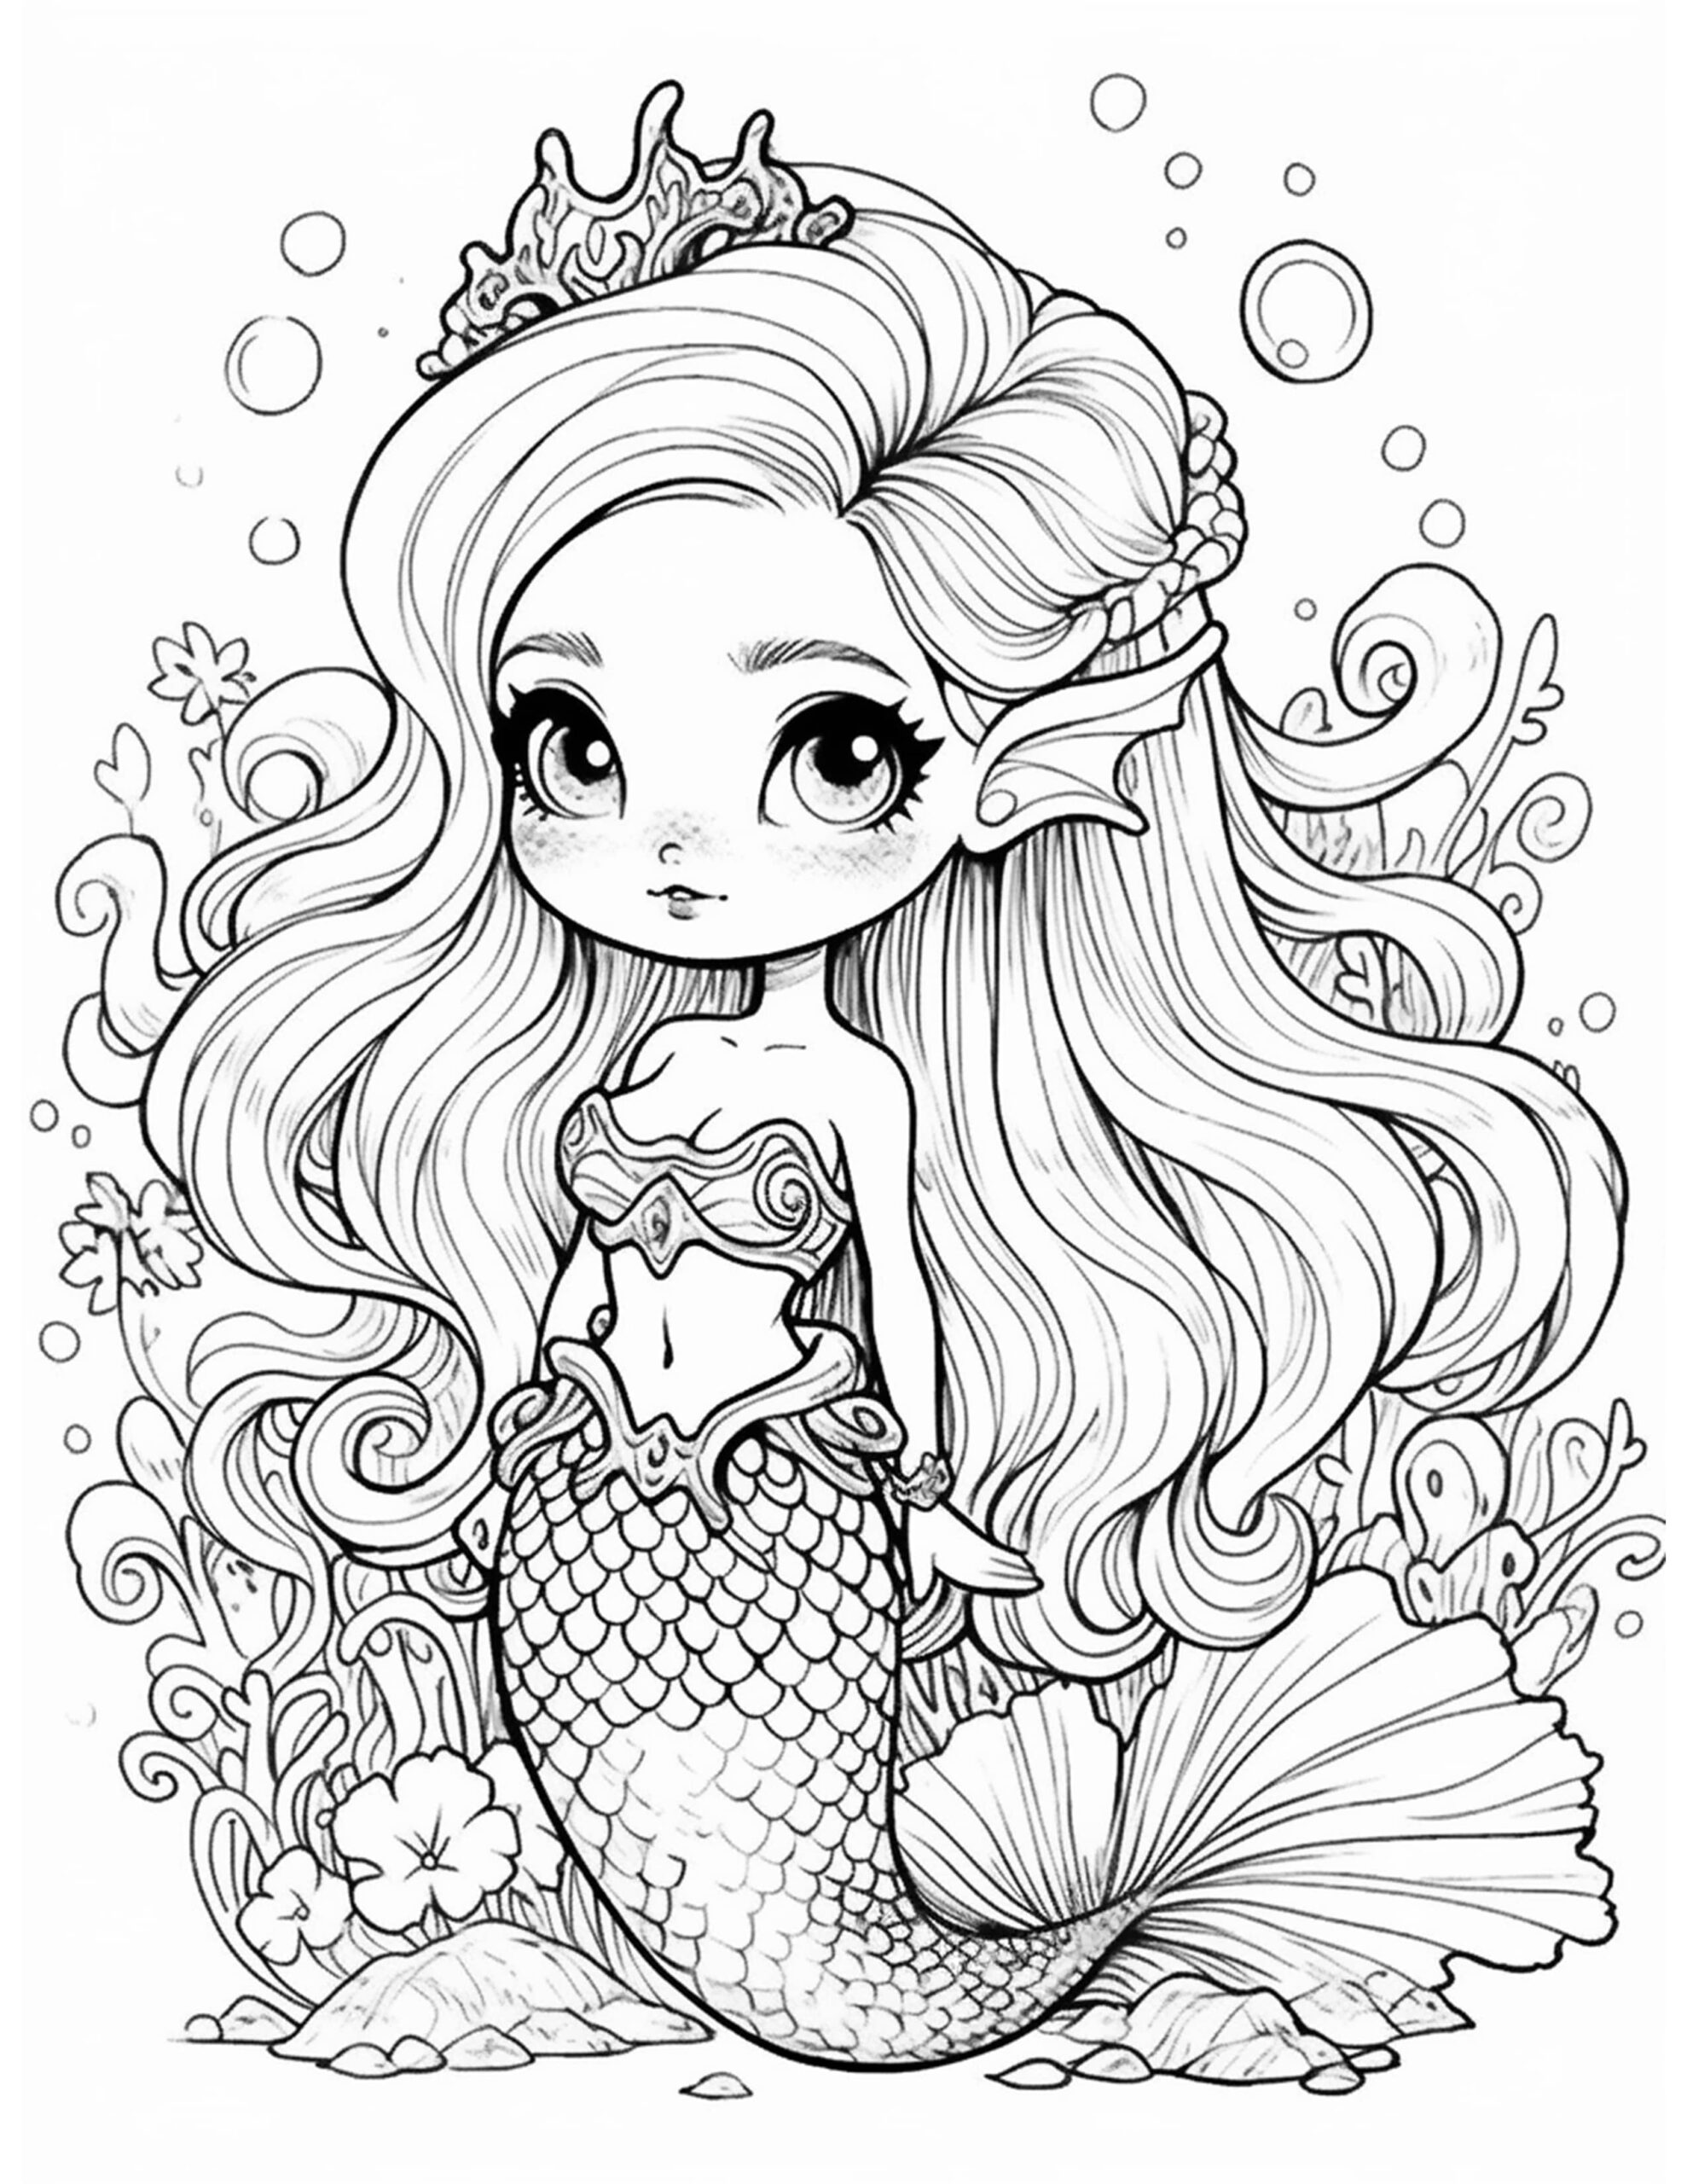 Mermaid Coloring Pages - The Poppy Jar